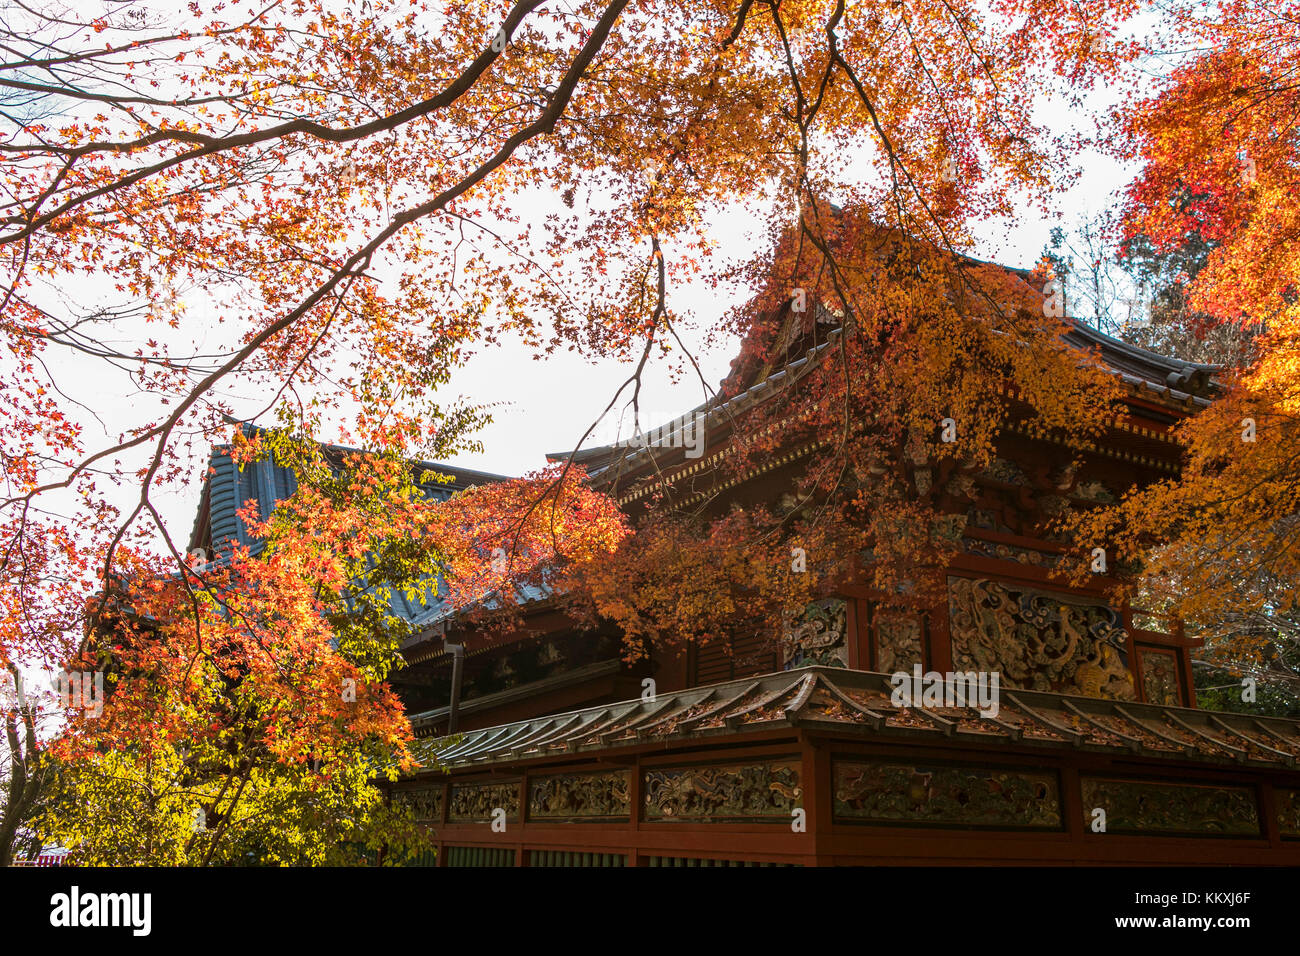 Mount Takao, Japan. 2nd December, 2017. Autumn foliage can still be seen on Mount Takao in Japan in December. Credit: Yuichiro Tashiro Credit: y.location/Alamy Live News Stock Photo